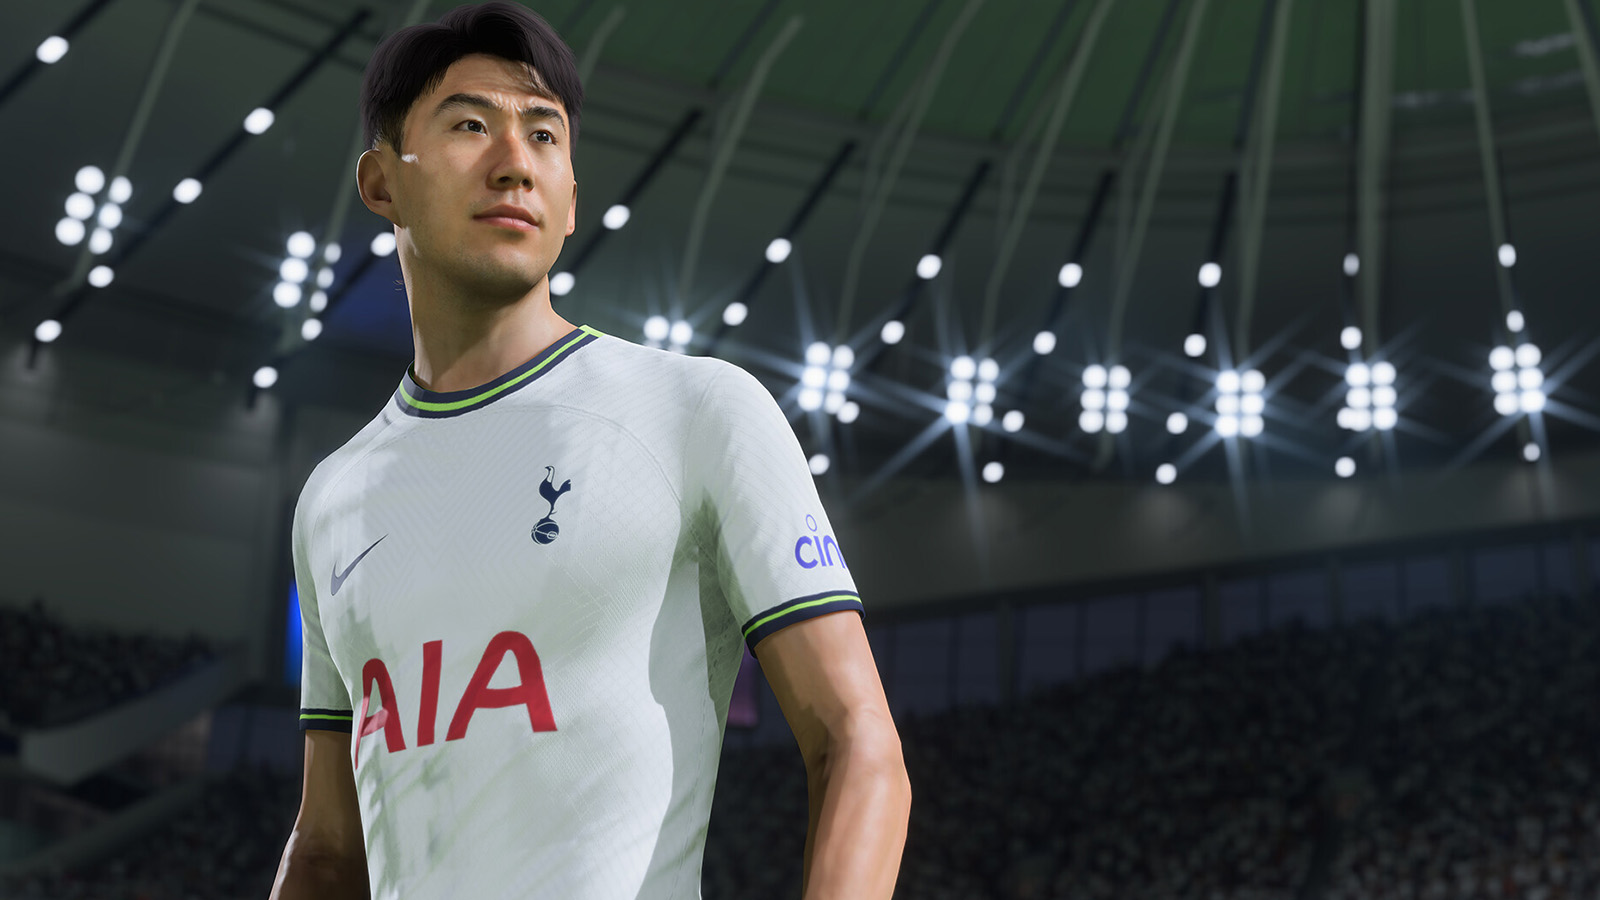 FIFA 23 career mode guide: The best players to buy